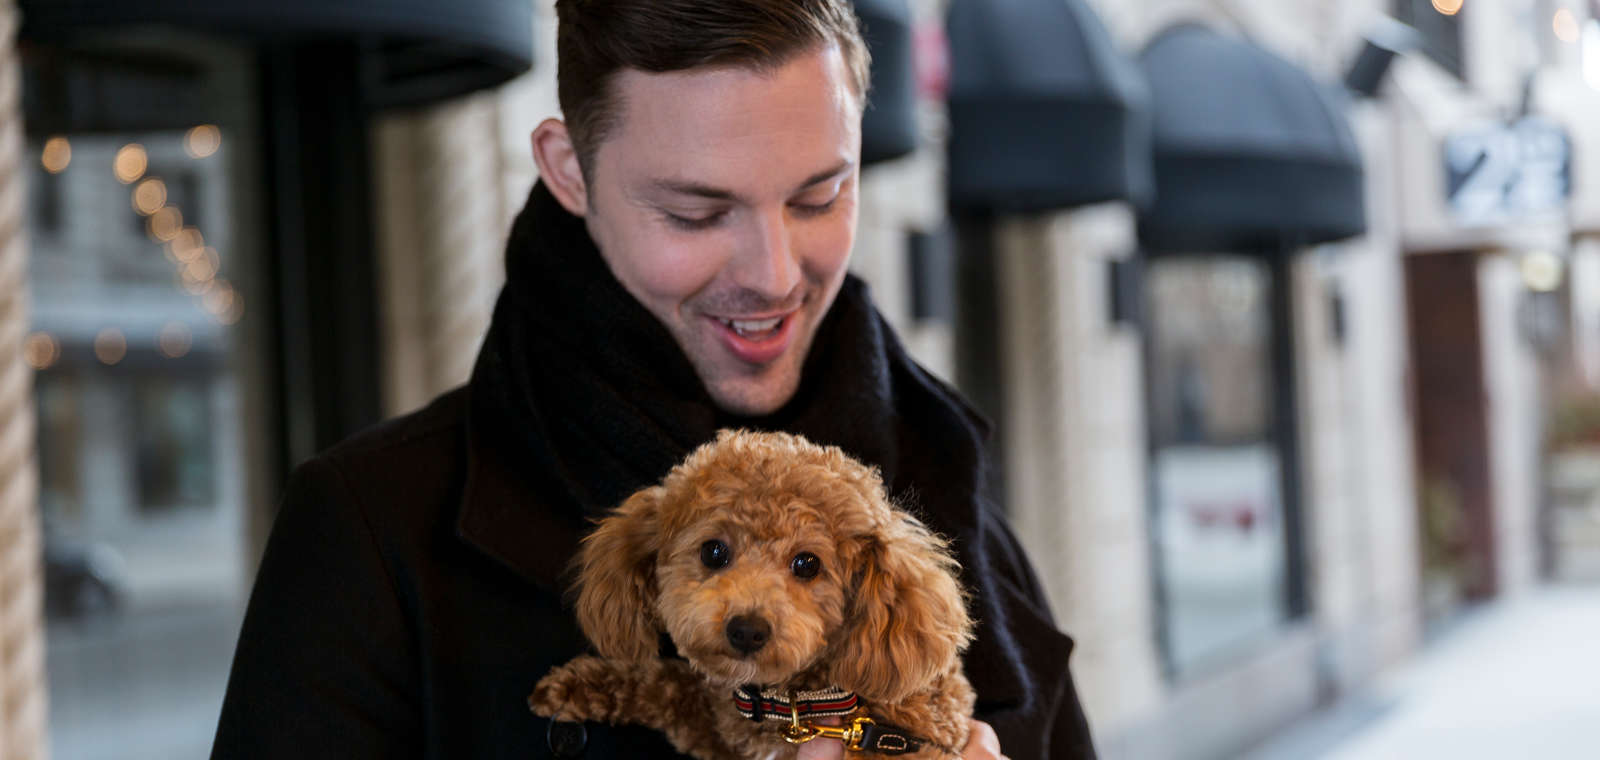 Hotel guest in downtown Chicago holding small dog